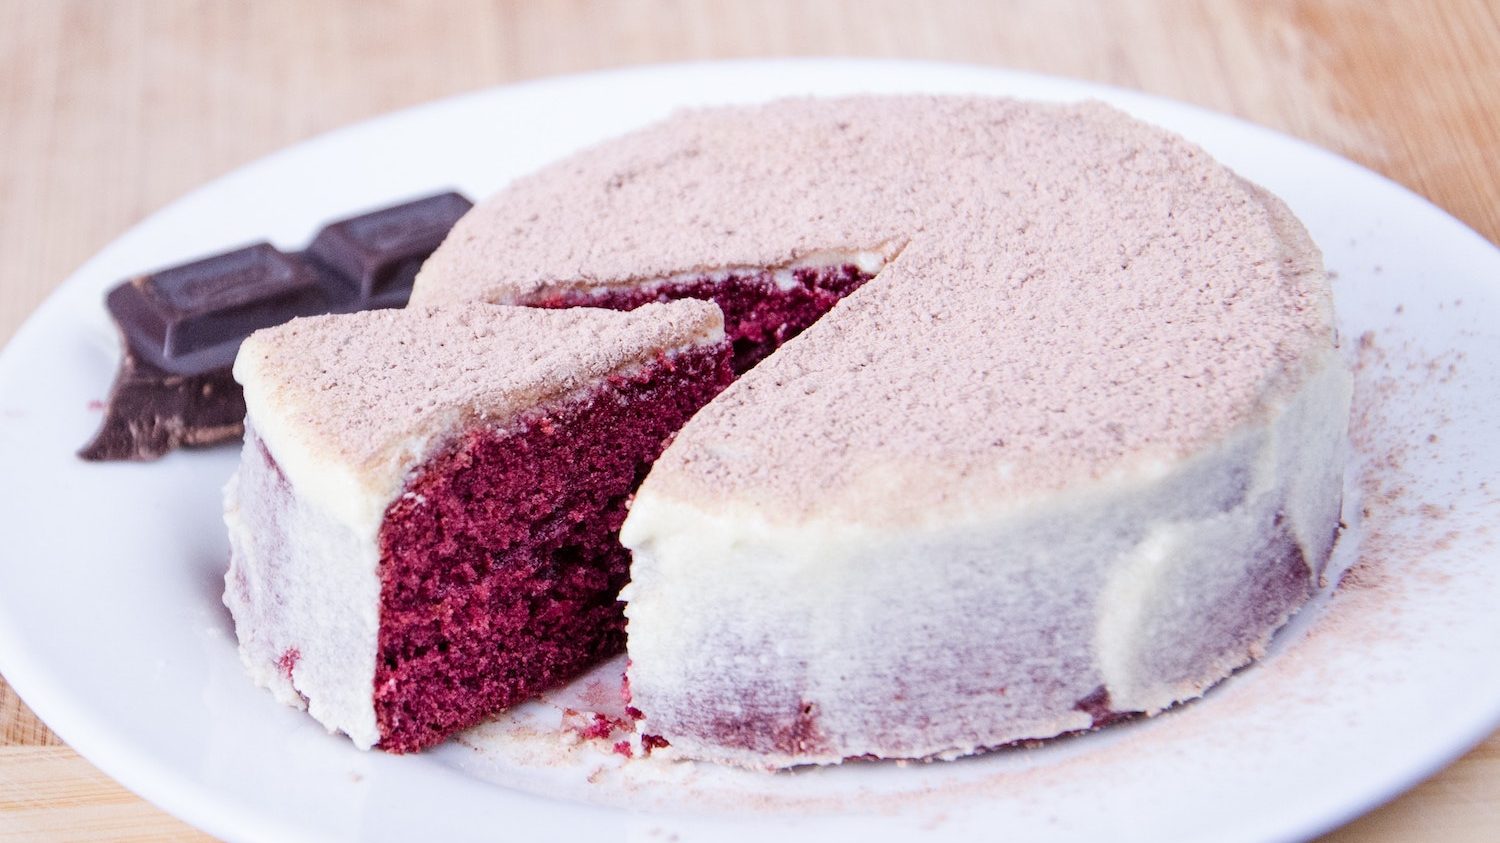 A cut slice of a single layer red velvet cake.